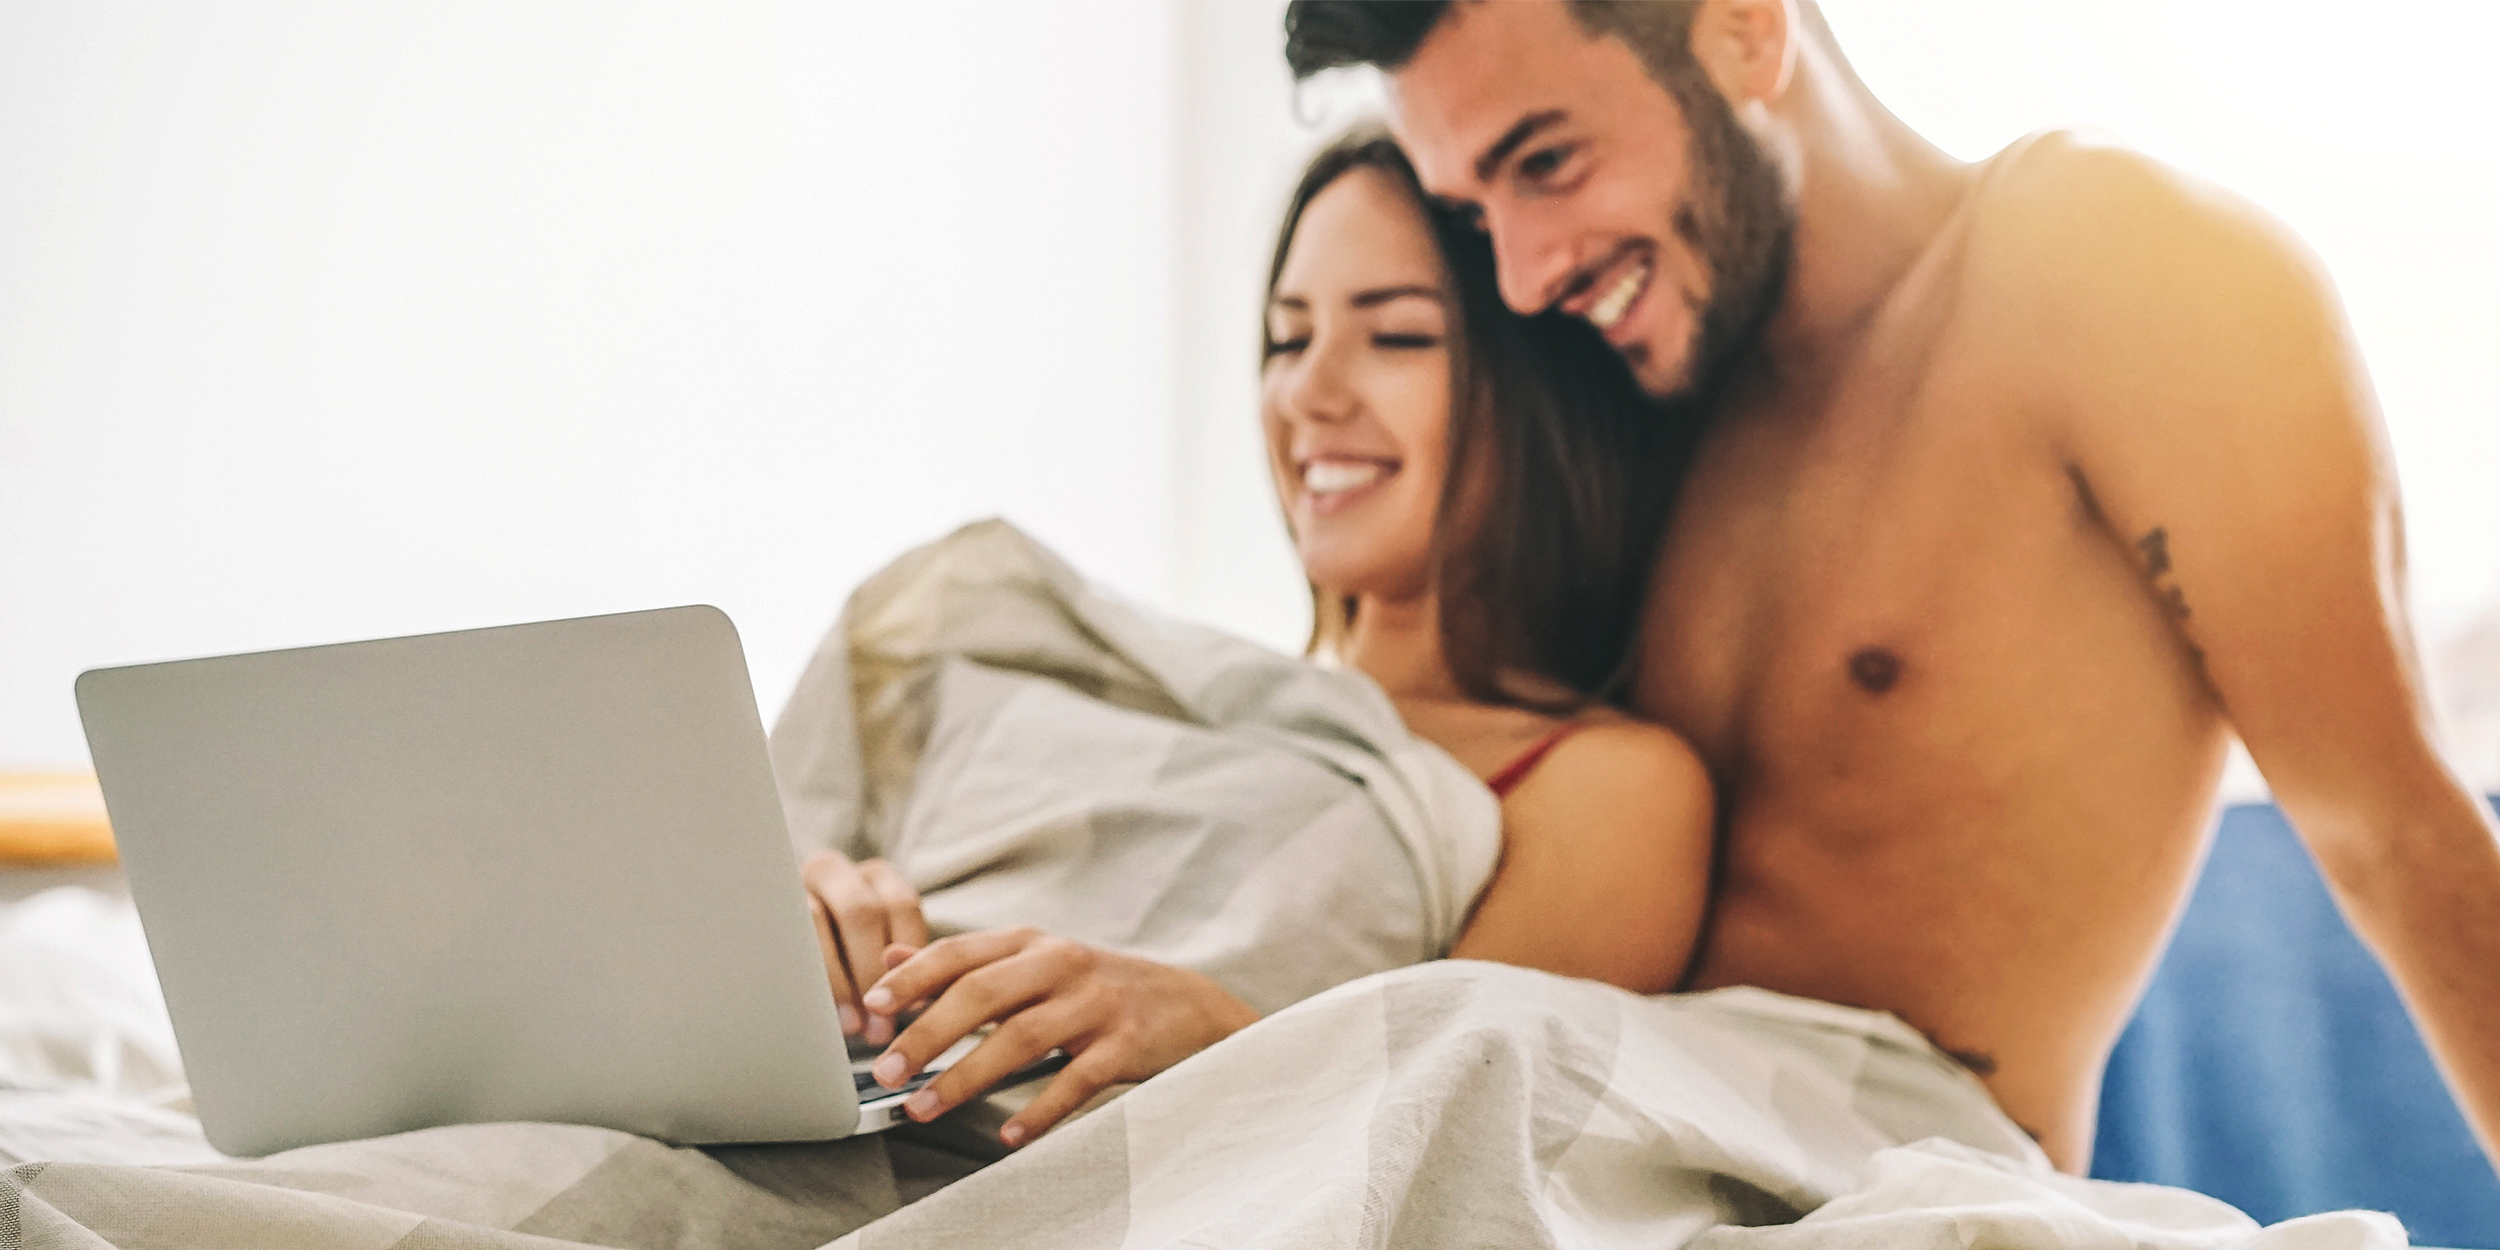 Porn For Couples The Best Couple Porn to Watch and Explore Together image